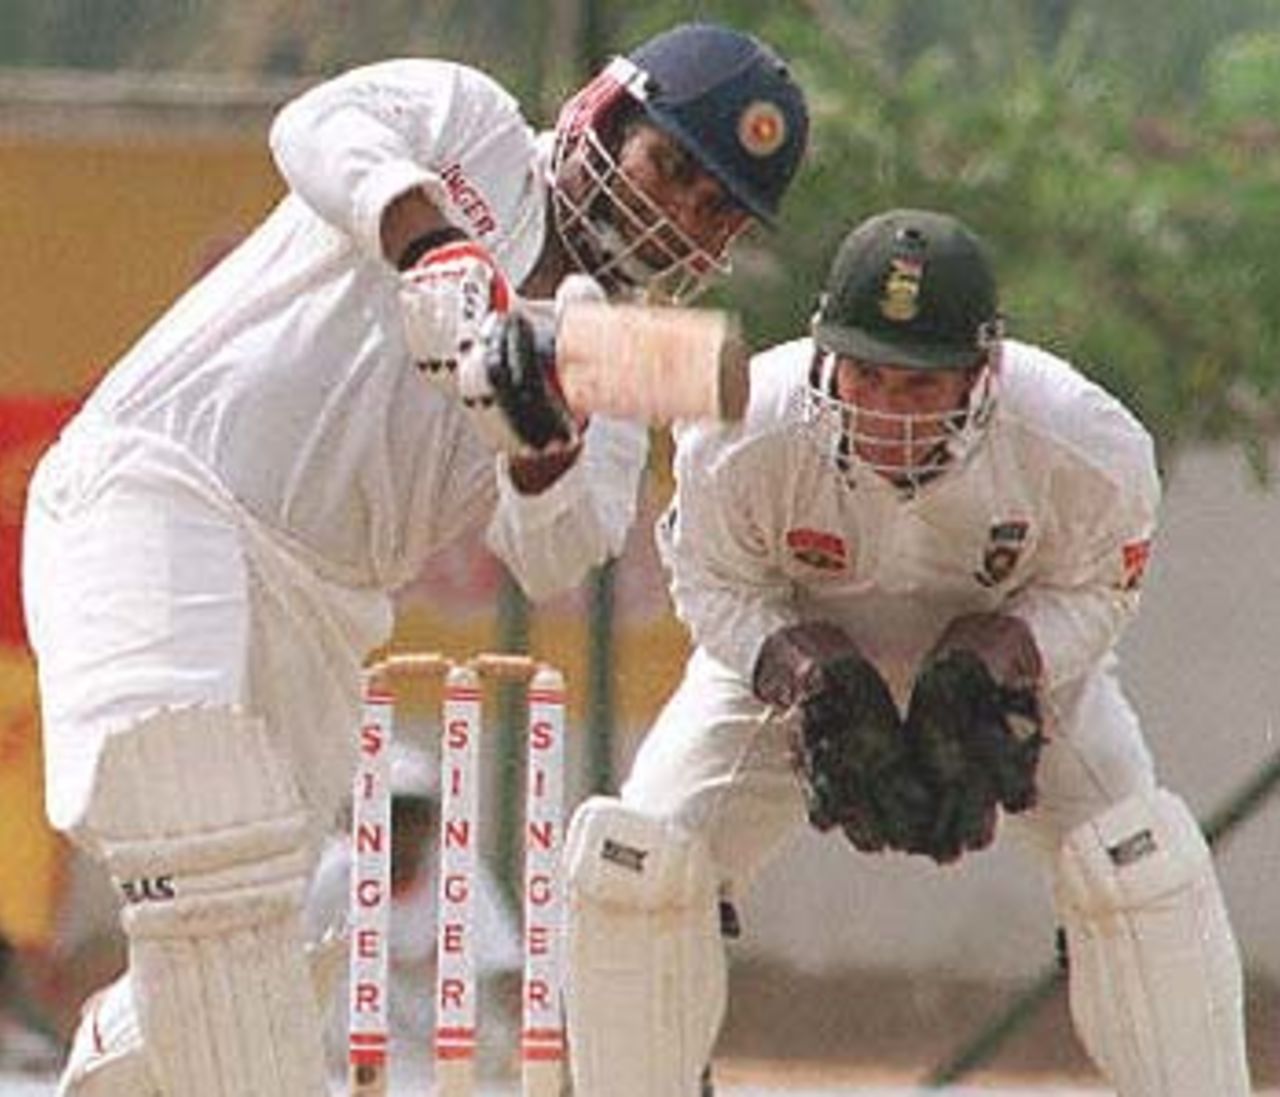 Sri Lankan batsman Arjuna Ranatunge sweeps the ball as wicket keeper Mark Boucher looks on during the fourth day of the second cricket test between South Africa and Sri Lanka. South Africa beat Sri Lanka by 7 runs to level the three match series 1-1. South Africa in Sri Lanka, 2000/01, 2nd Test, Sri Lanka v South Africa, Asgiriya Stadium, Kandy, 30July-03August 2000 (Day 4).